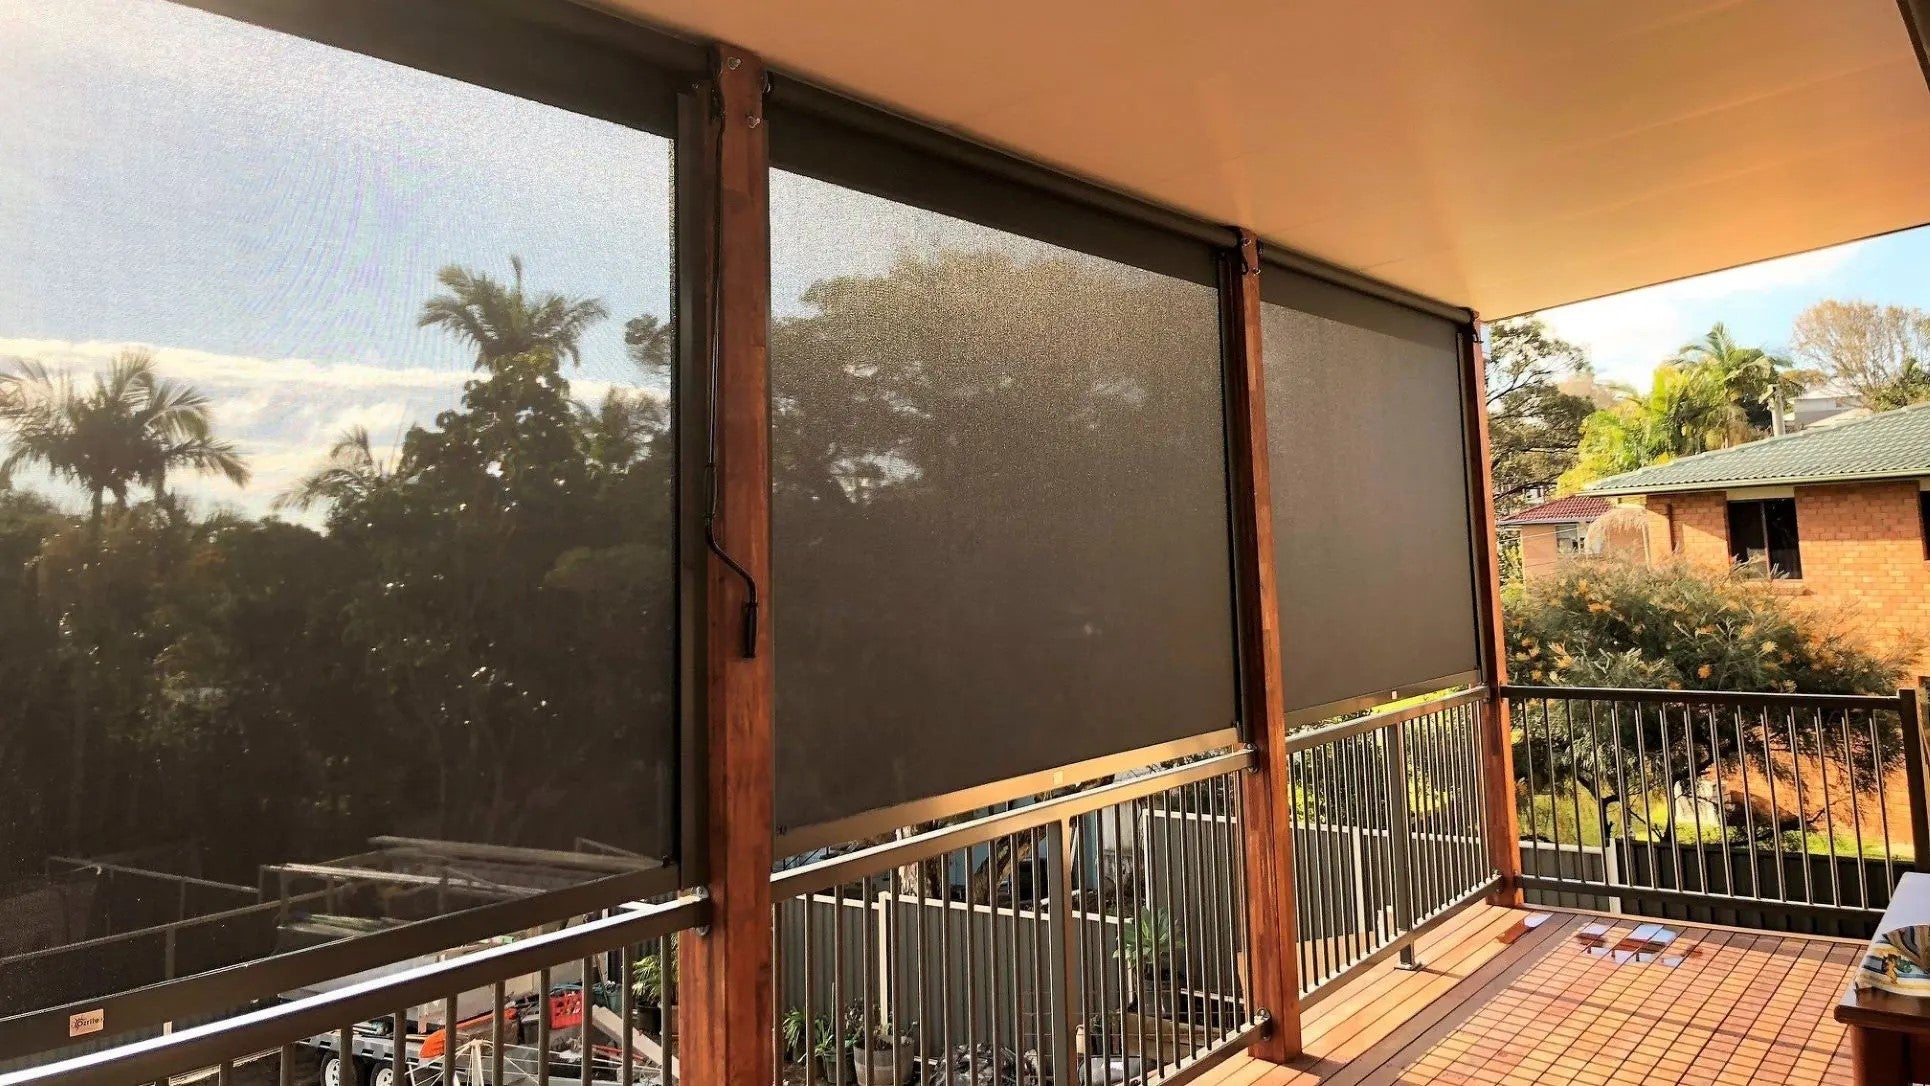 Patio blinds to complement your outdoor décor